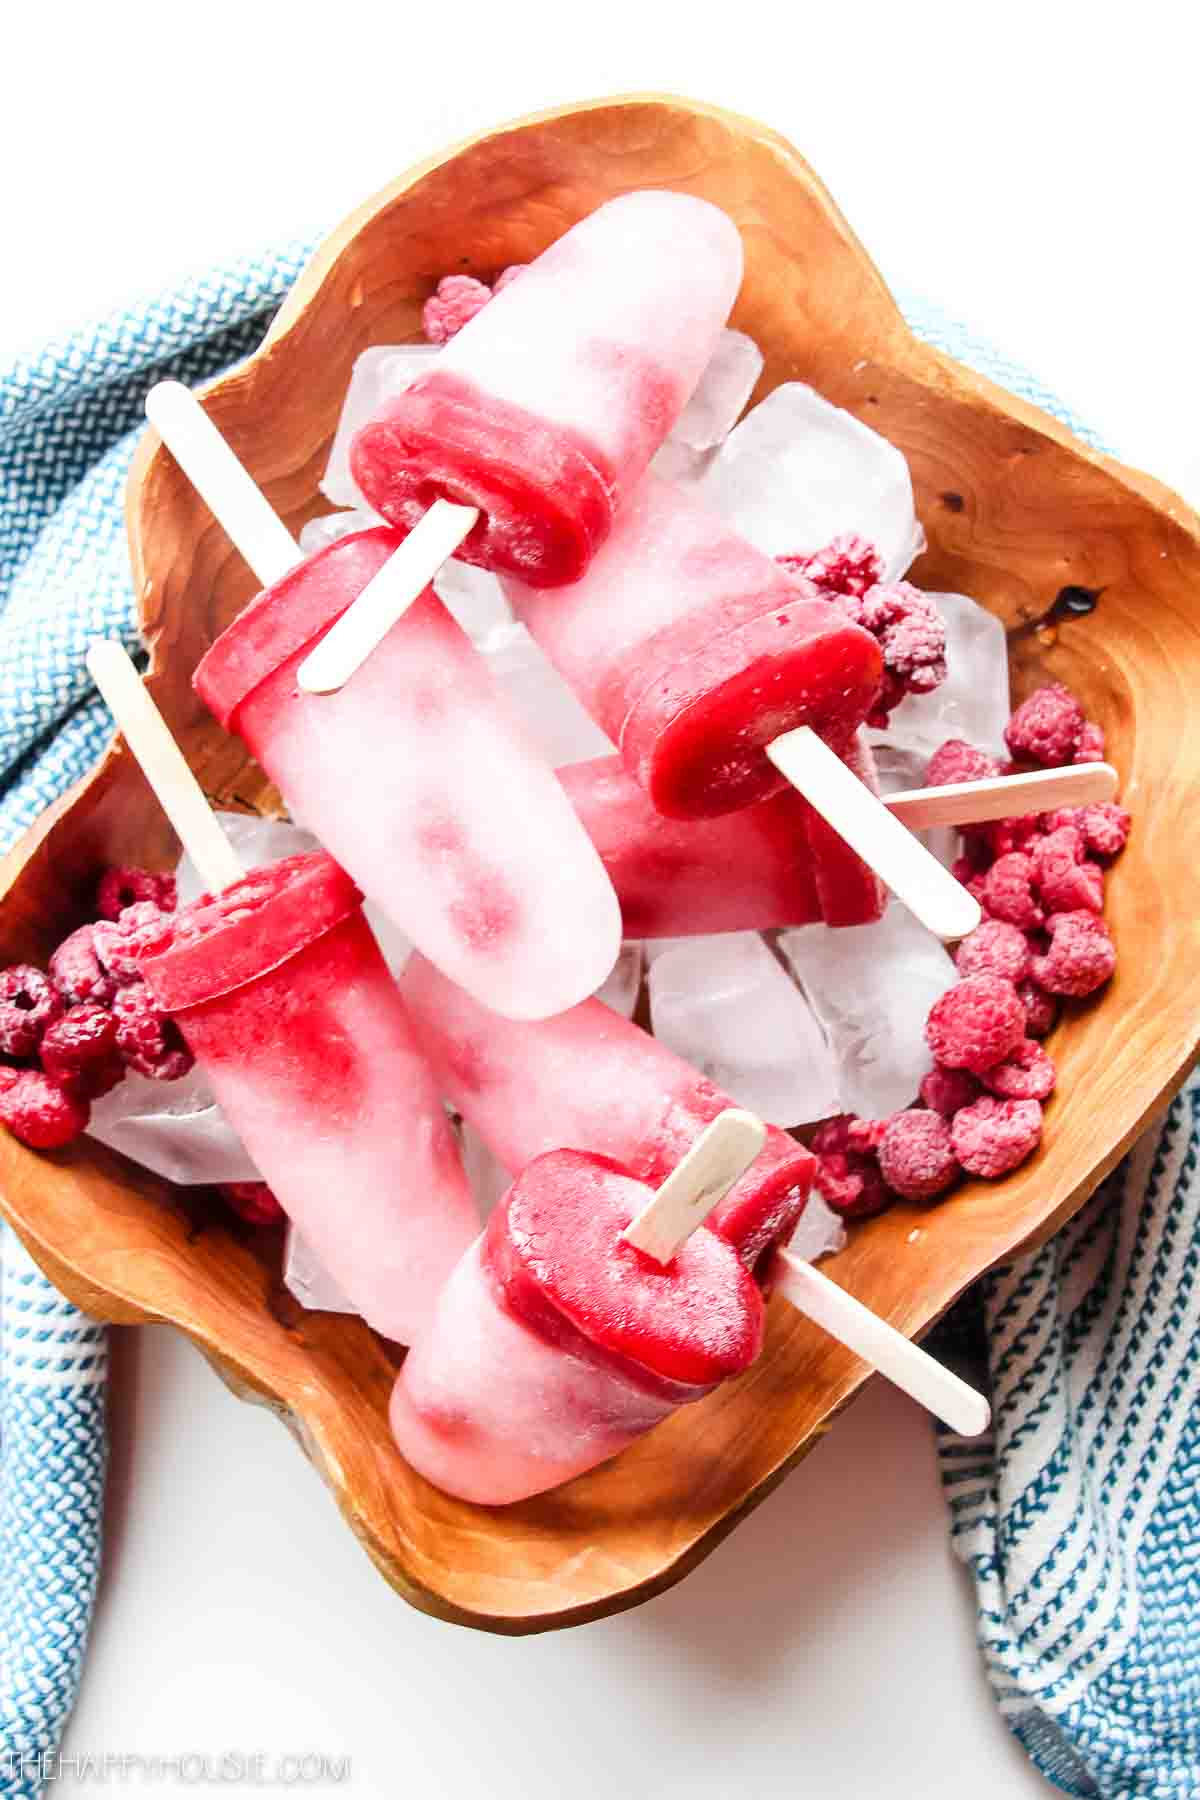 The frozen popsicles in a wooden bowl with berries around them.